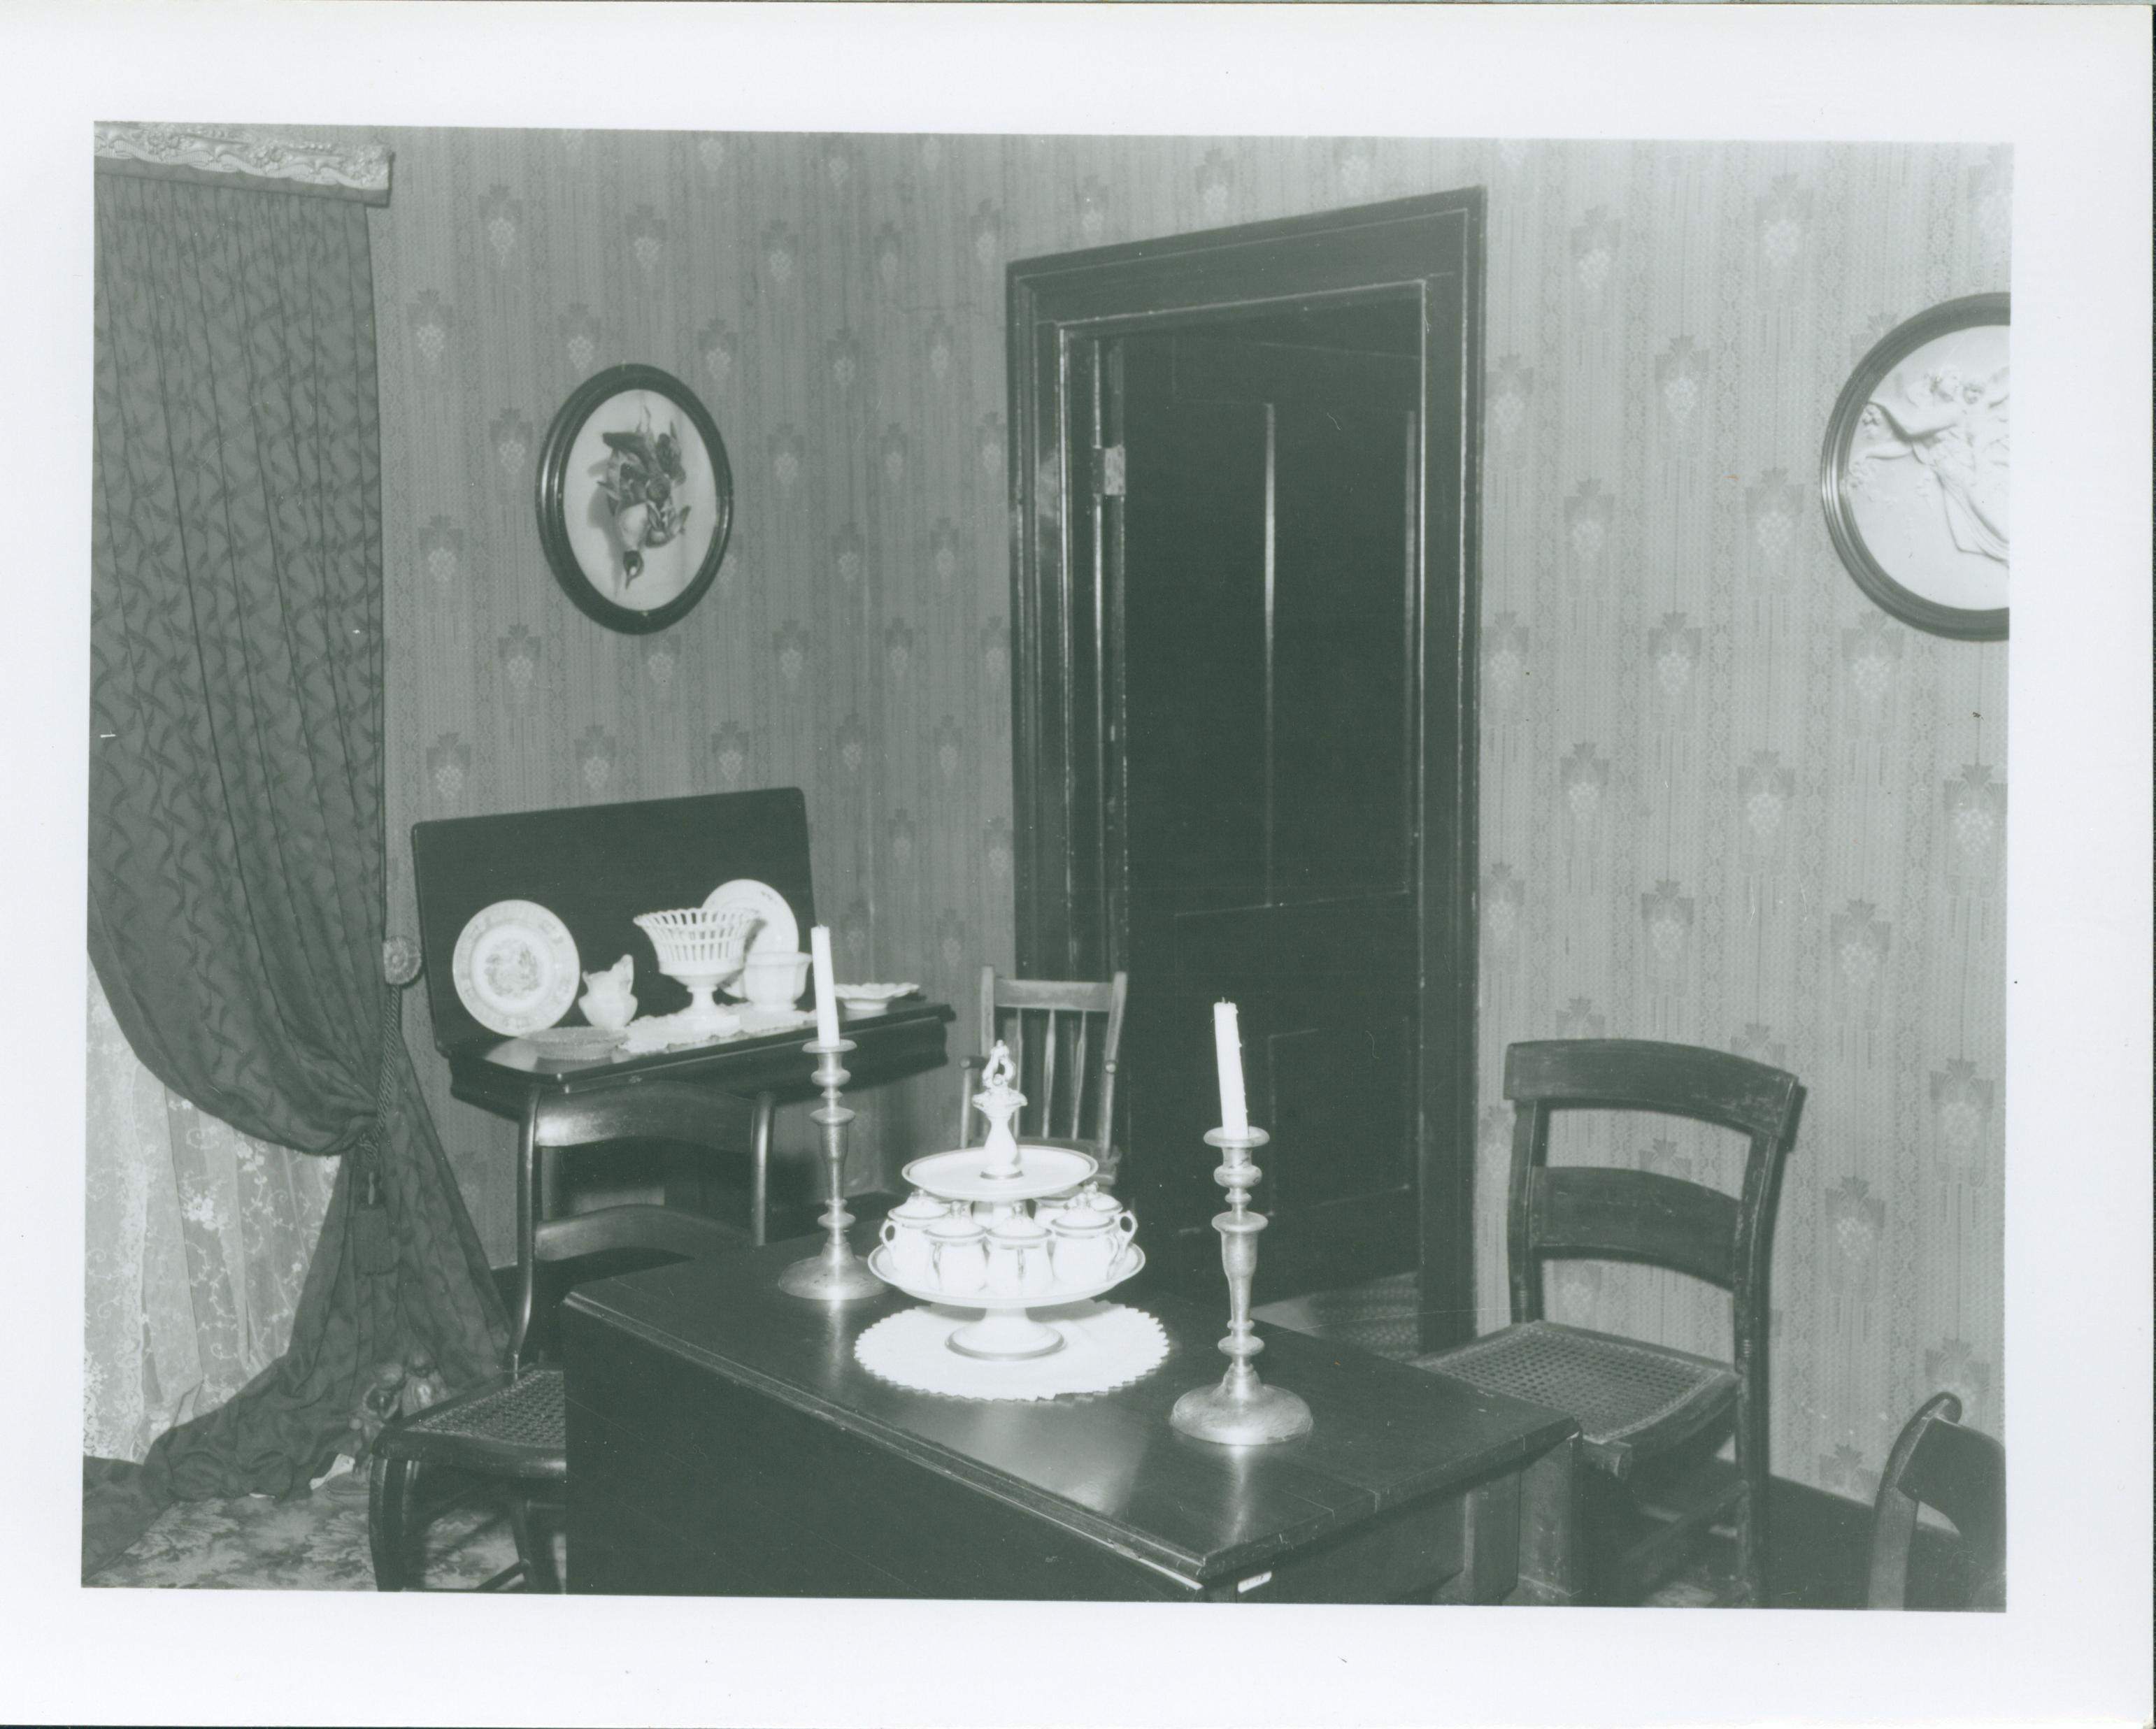 NA Dining Room, Negative # 632, See Classification # 7 Lincoln, home, Dining Room, furnishings